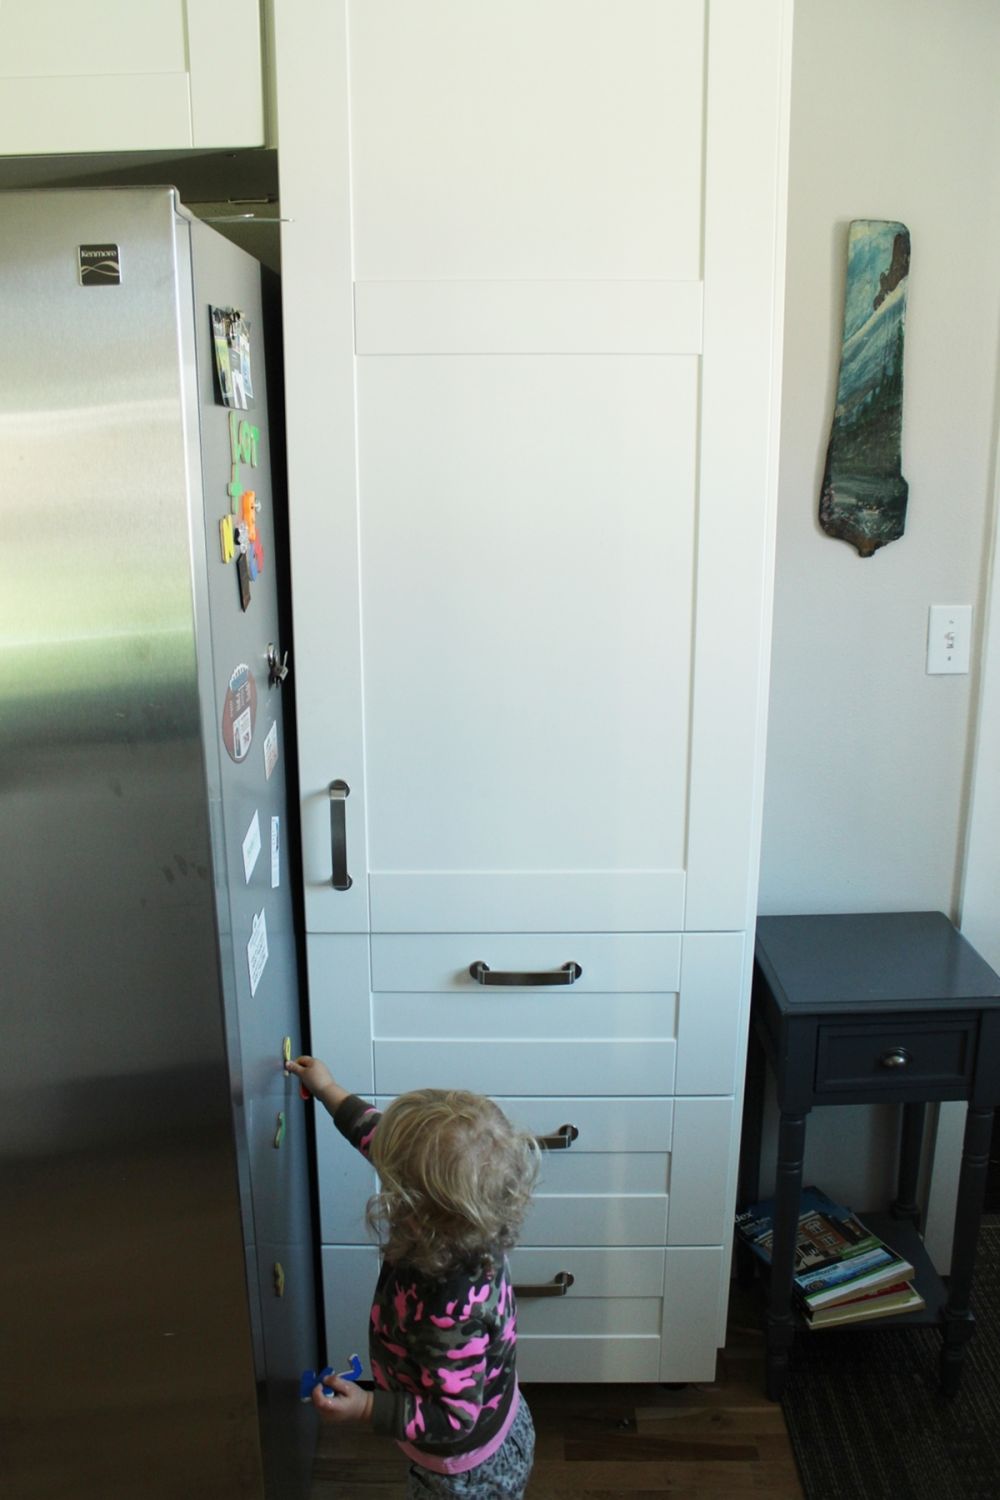 How to Decorate Kitchen with kids in mind